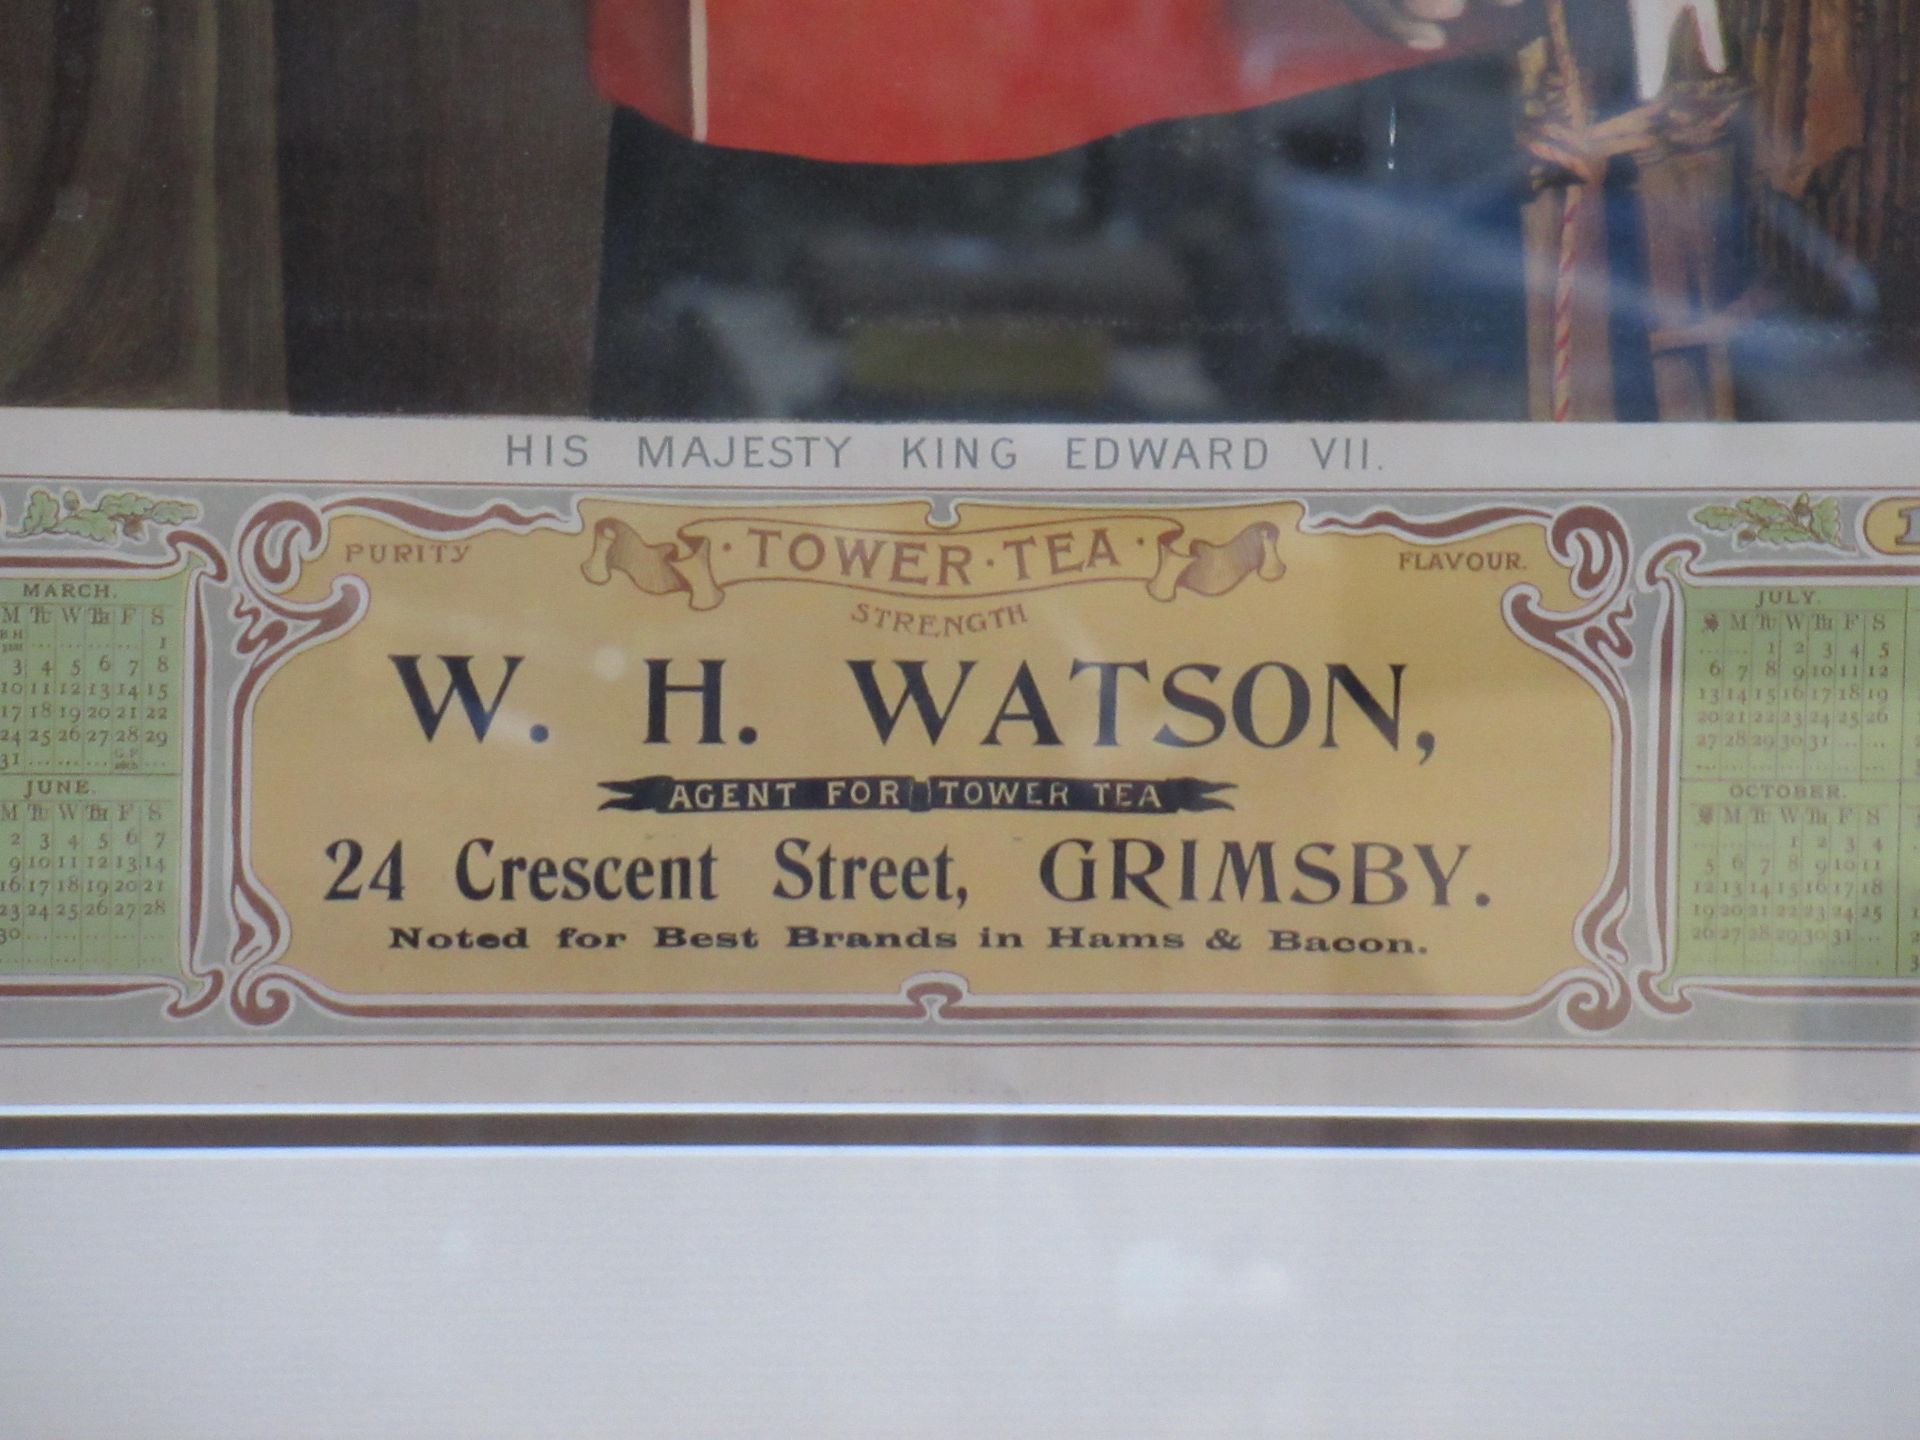 W.H Watson 24 Crescent Street, Grimsby Tower Tea 'His Majesty King Edward VII' 1902 calendar in fram - Image 2 of 6